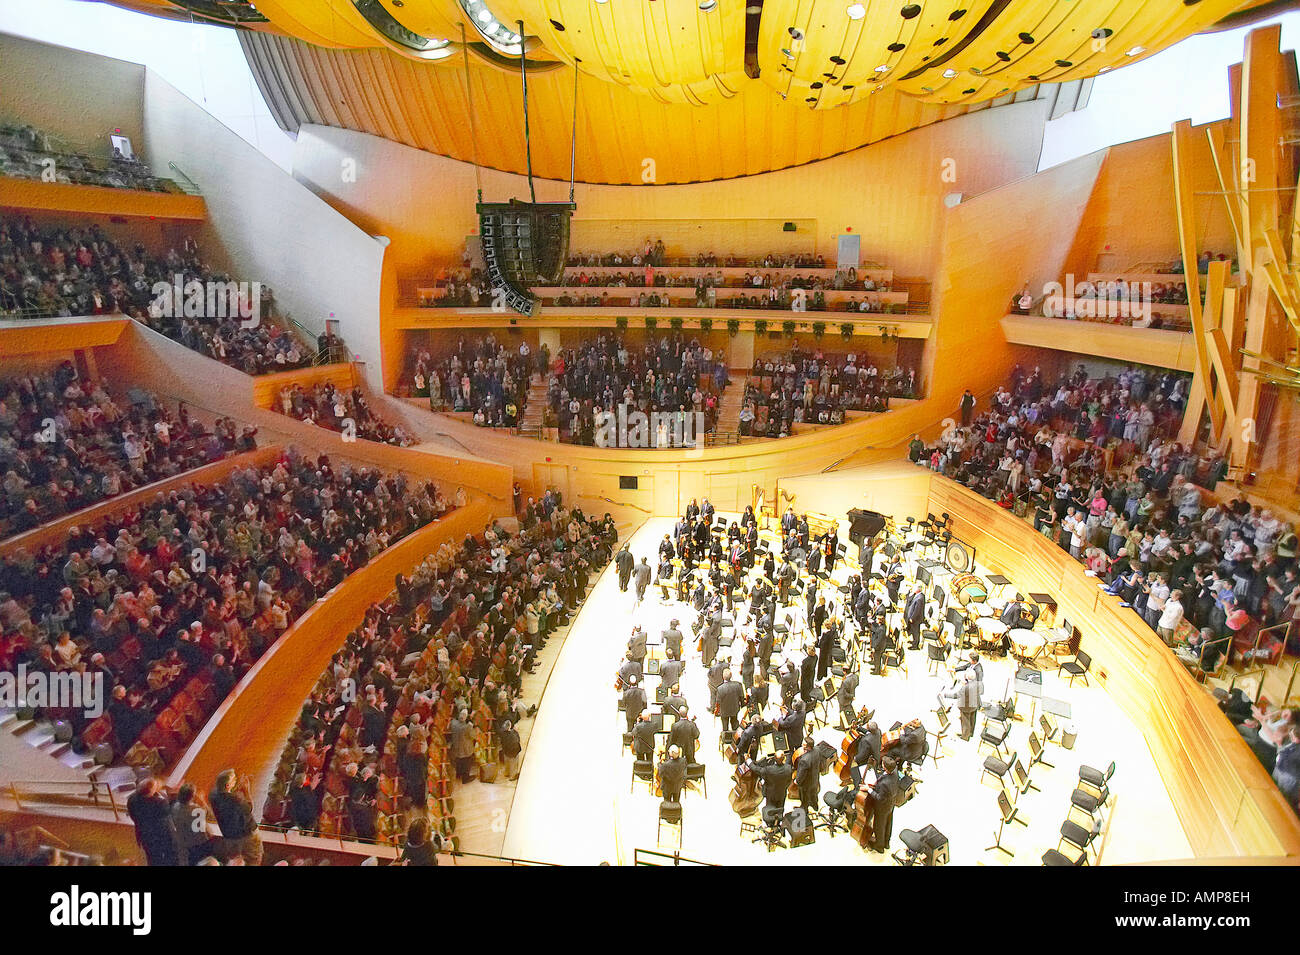 Digitally altered view of the Los Angeles Philharmonic orchestra performing at the new Disney Concert Hall Stock Photo